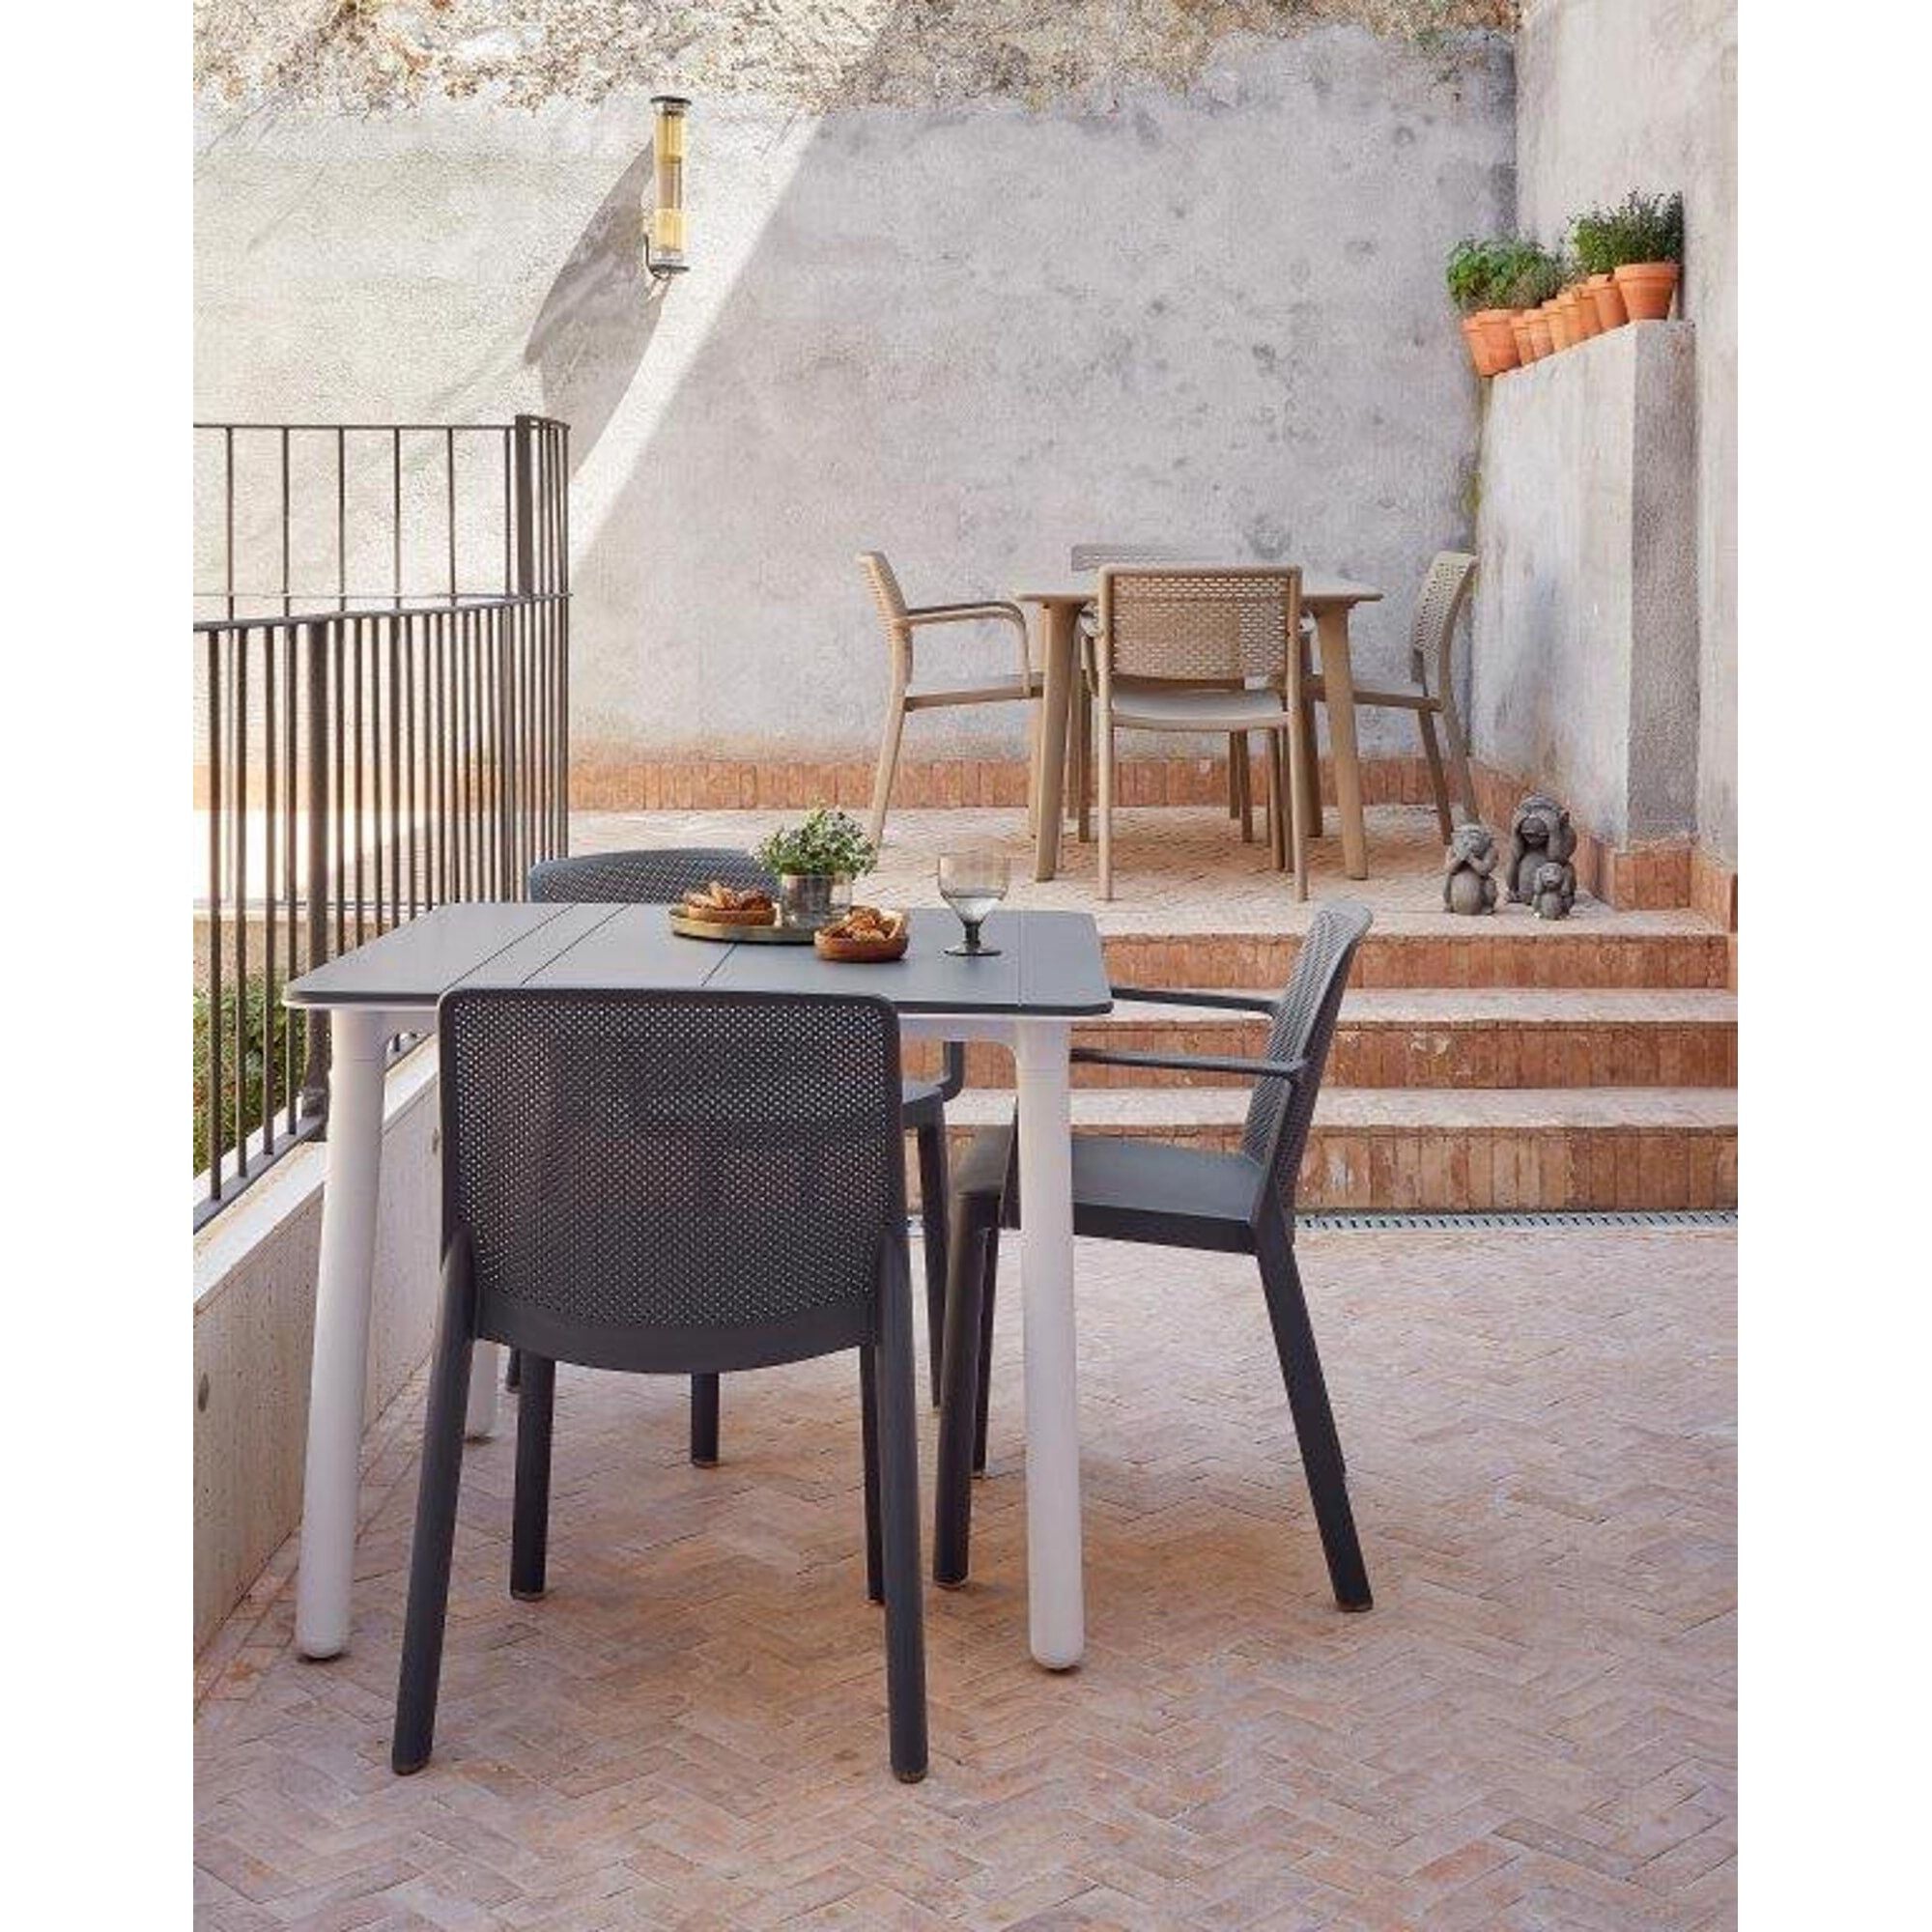 Garbar NOA square table indoors, outdoors 90x90